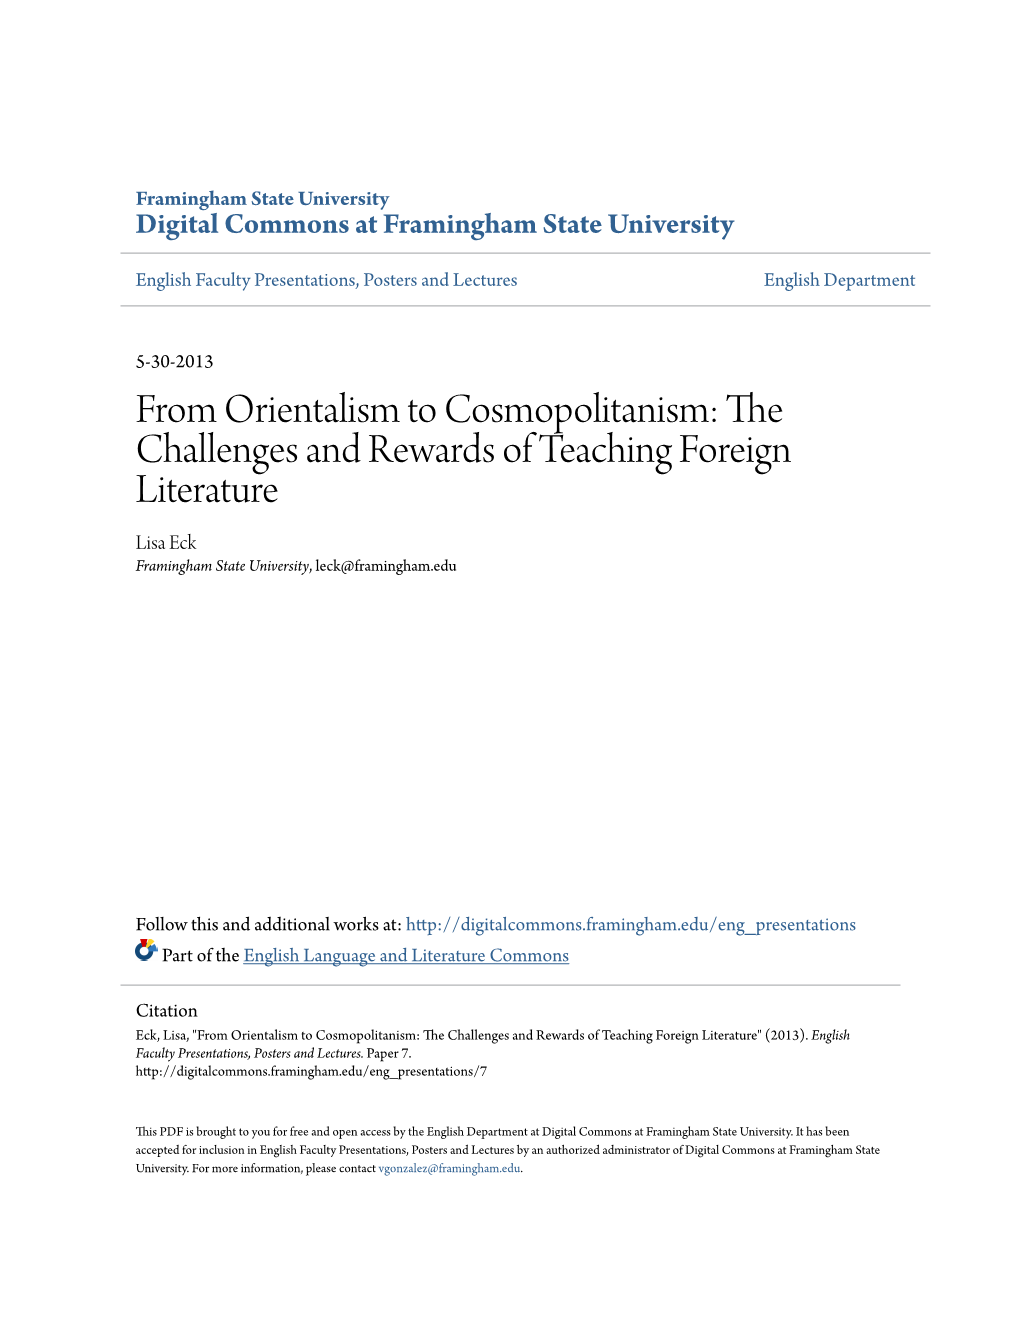 From Orientalism to Cosmopolitanism: the Challenges and Rewards of Teaching Foreign Literature Lisa Eck Framingham State University, Leck@Framingham.Edu